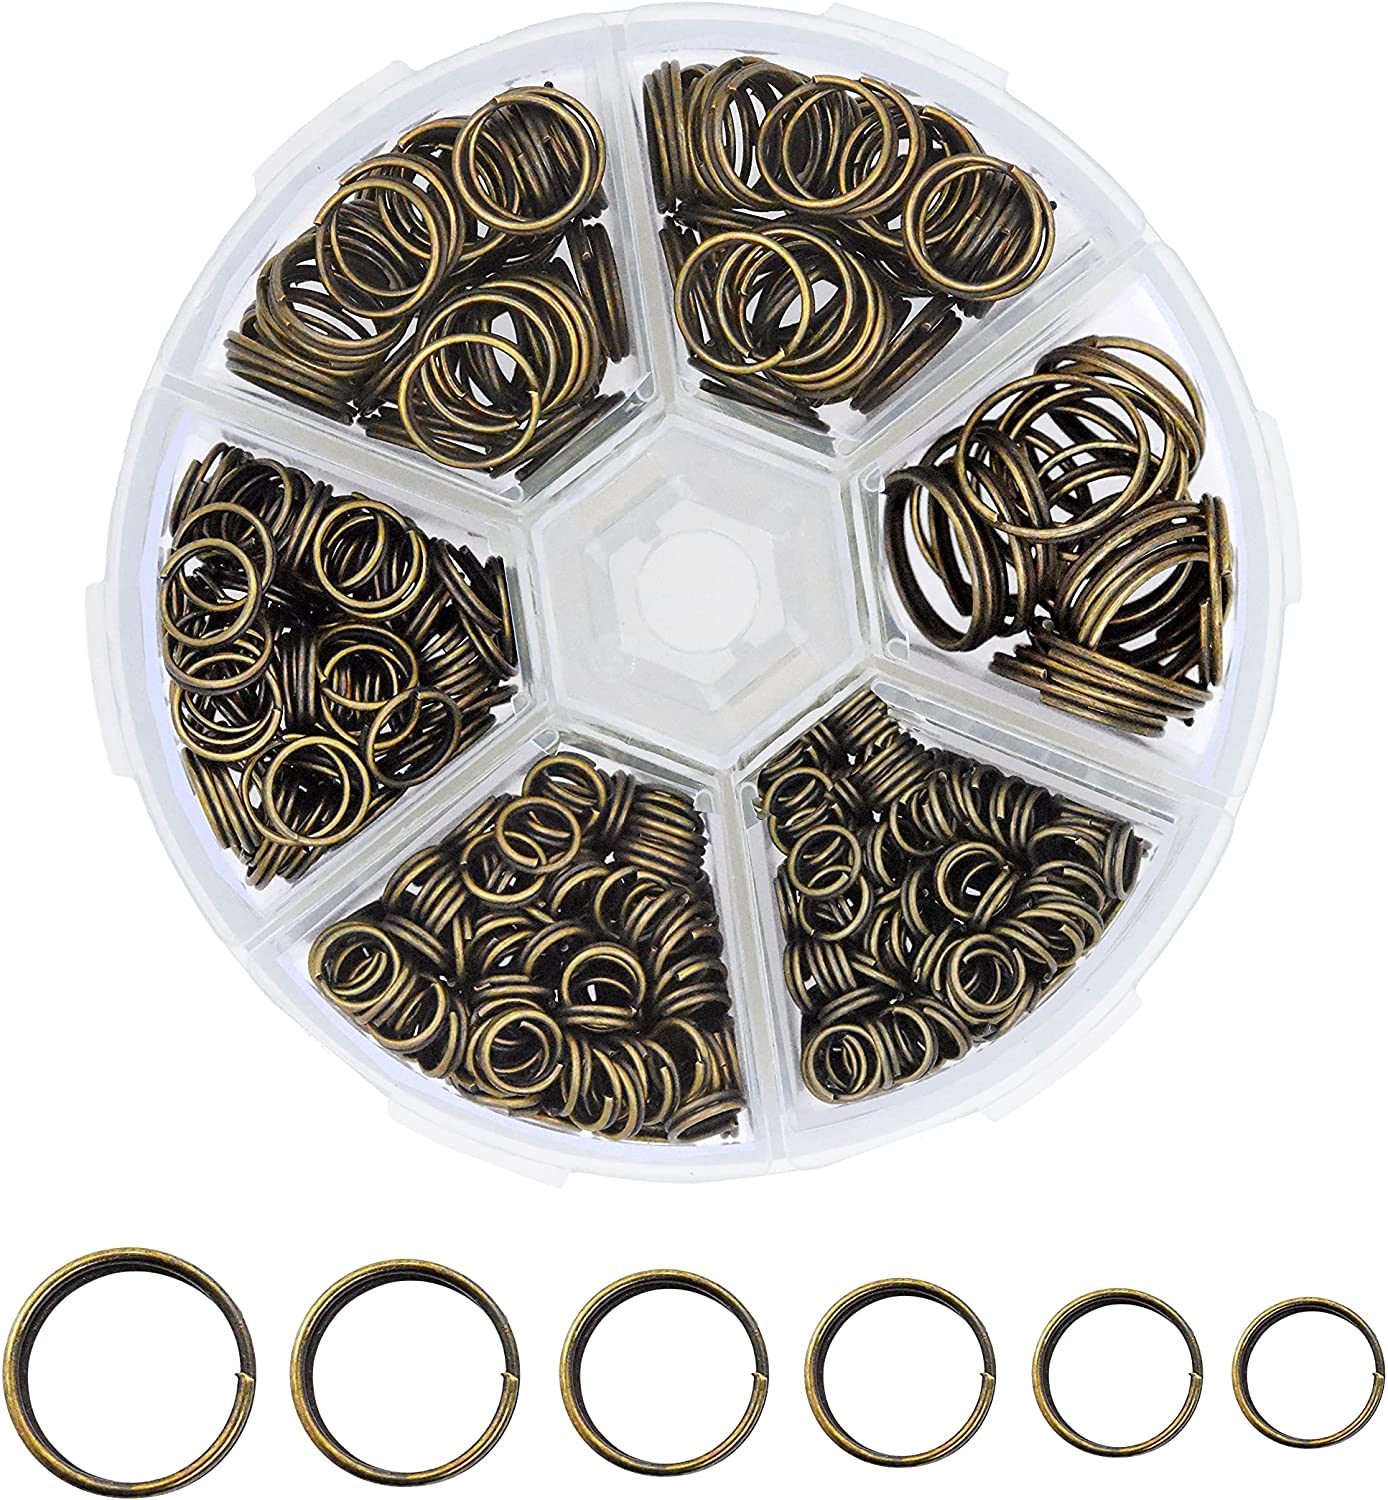 100 Piece Mini Stainless Steel Split Rings Connectors for Arts & Crafts, Chandelier, Necklaces, Homemade Jewelry Making, DIY Keychains, Crystal